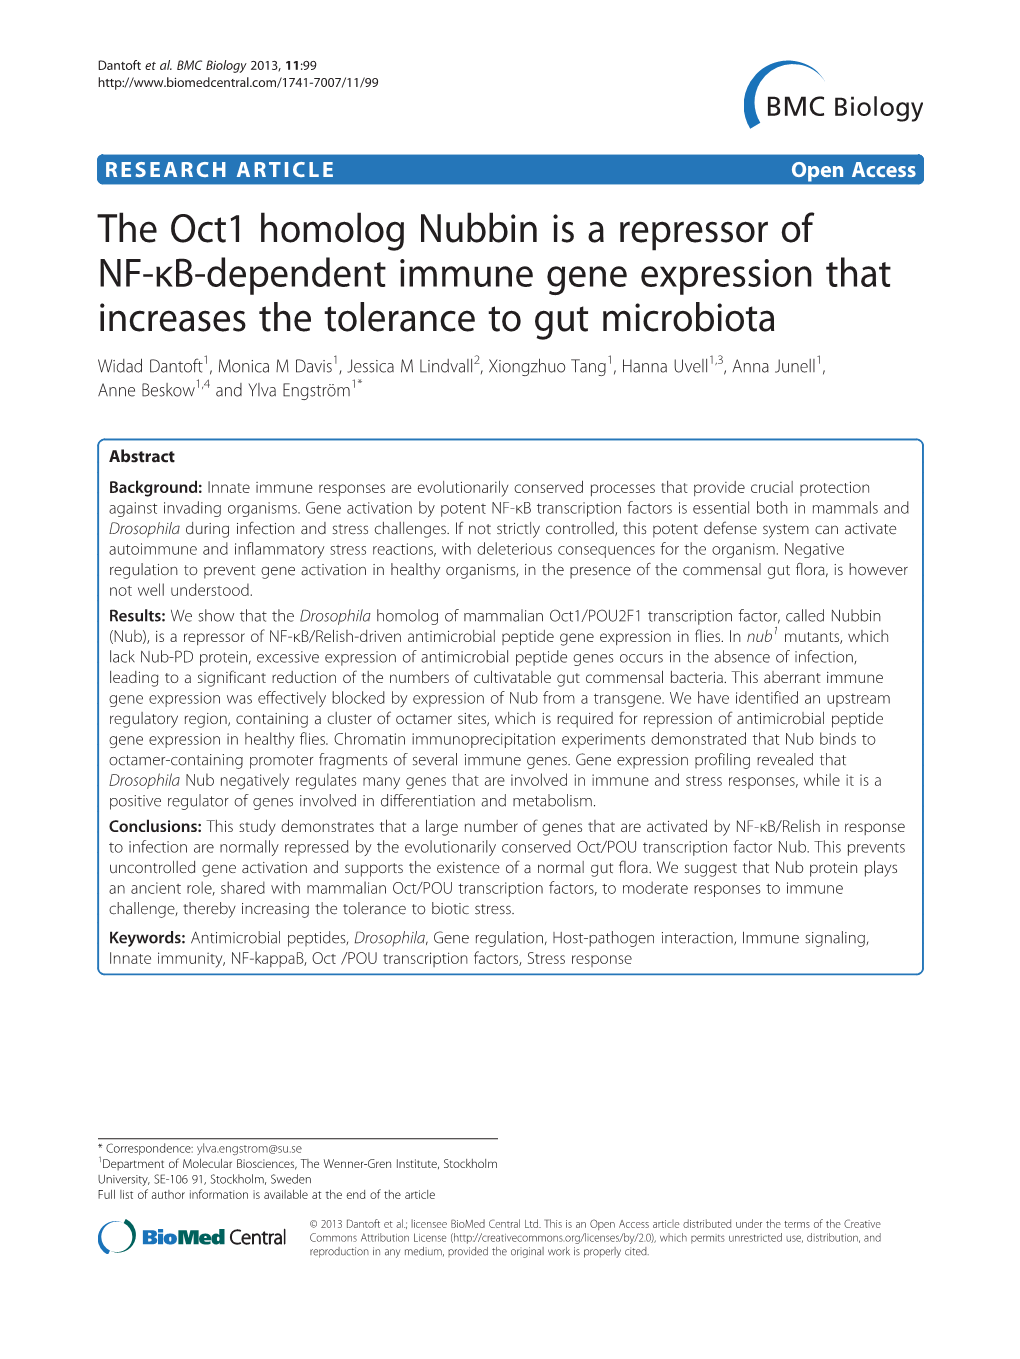 The Oct1 Homolog Nubbin Is a Repressor of NF-Κb-Dependent Immune Gene Expression That Increases the Tolerance to Gut Microbiota